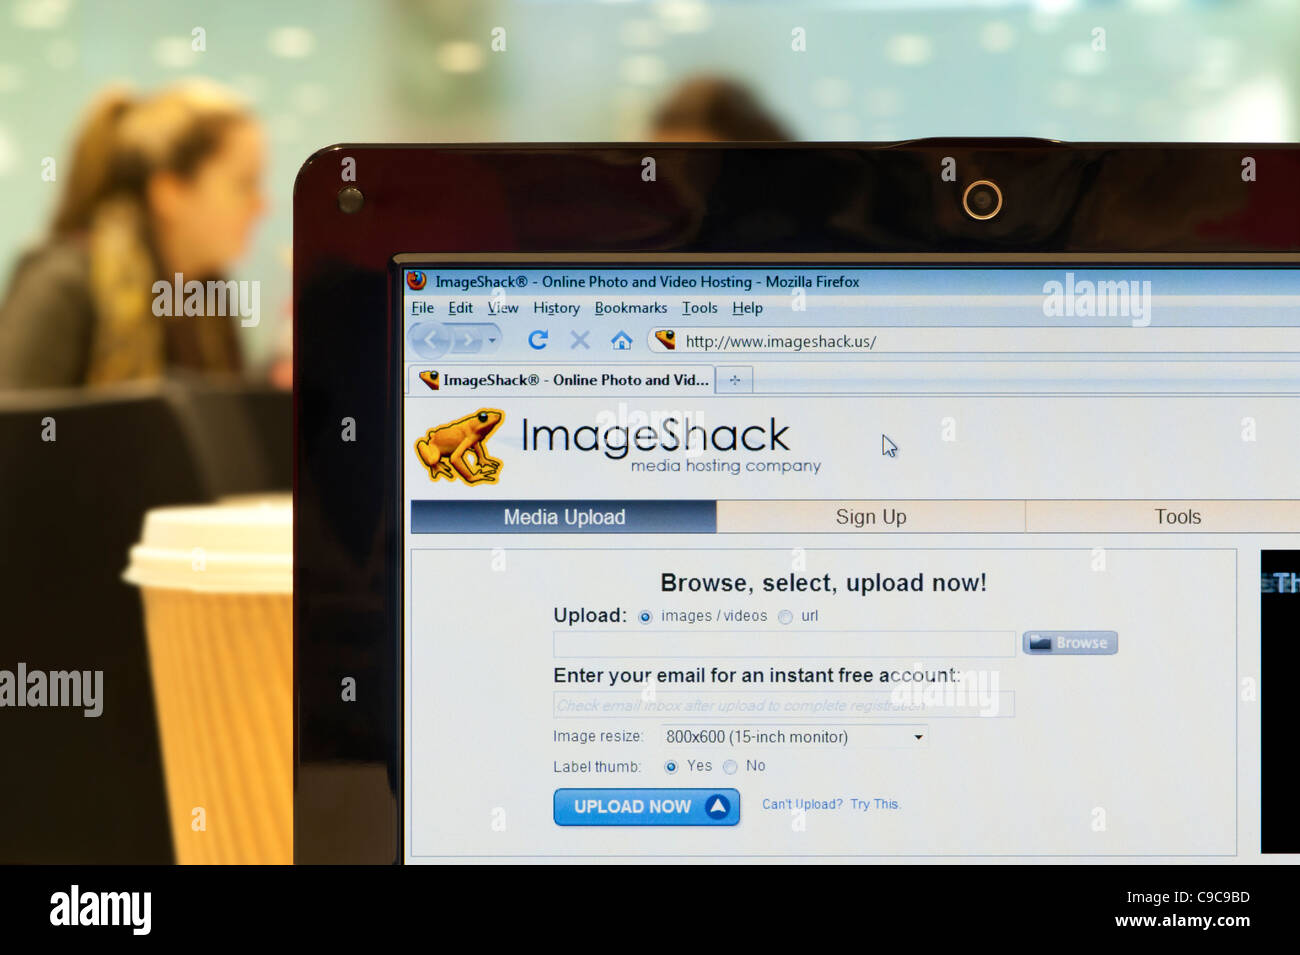 The ImageShack website shot in a coffee shop environment (Editorial use only: print, TV, e-book and editorial website). Stock Photo